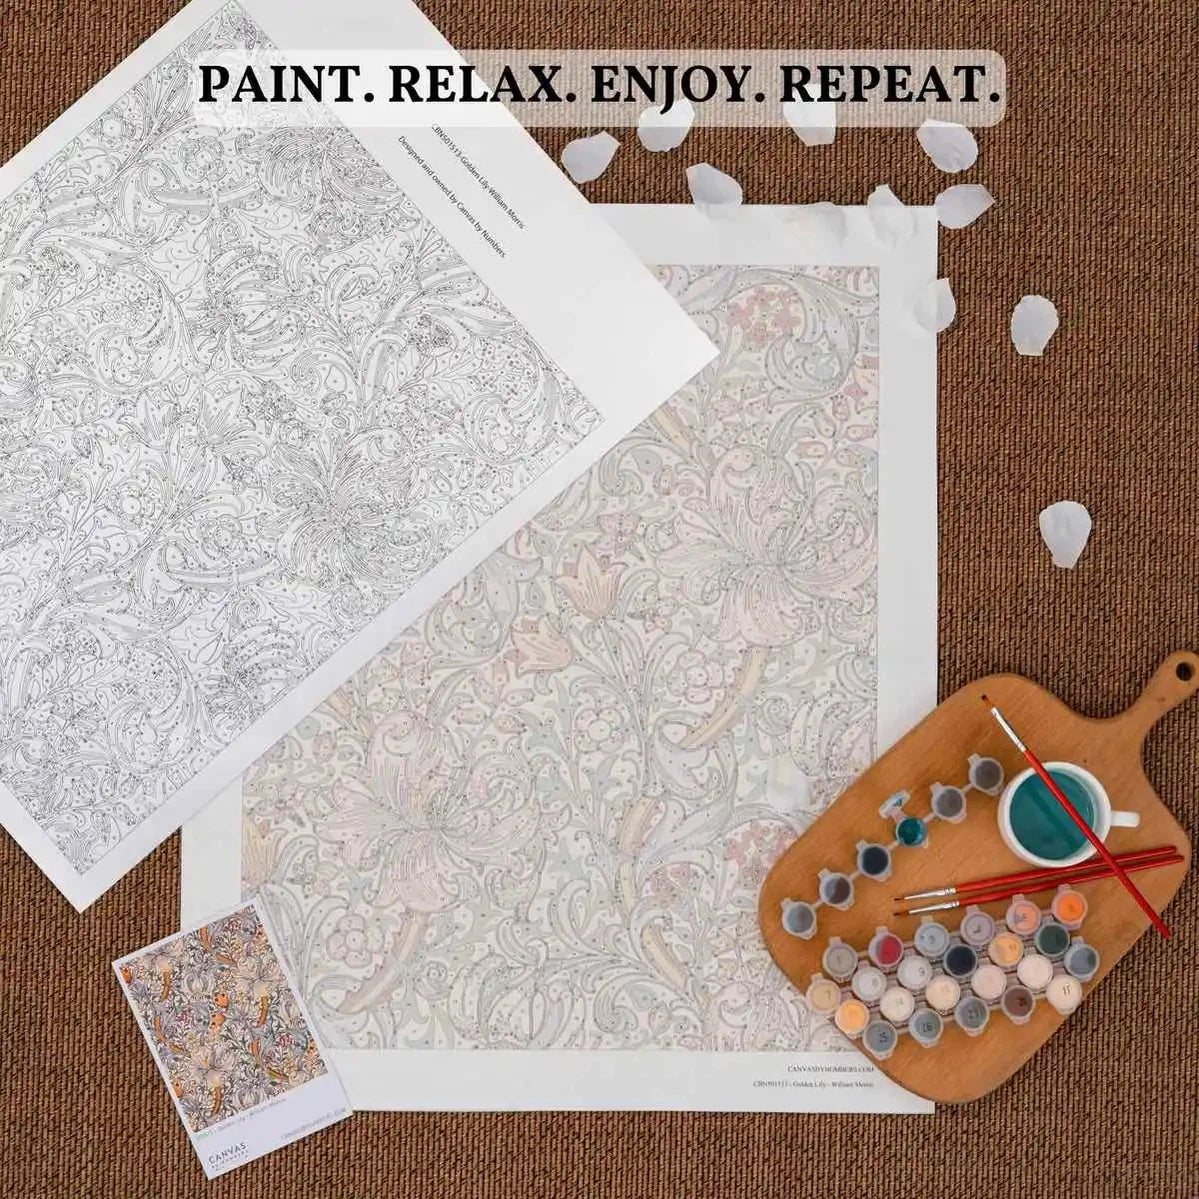 Peach Tree - Paint by Numbers-Bring Van Gogh’s 'Peach Tree' to life with our Van Gogh Paint by Numbers kit. Experience his unique style as you paint this vibrant, blossoming scene.-Canvas by Numbers